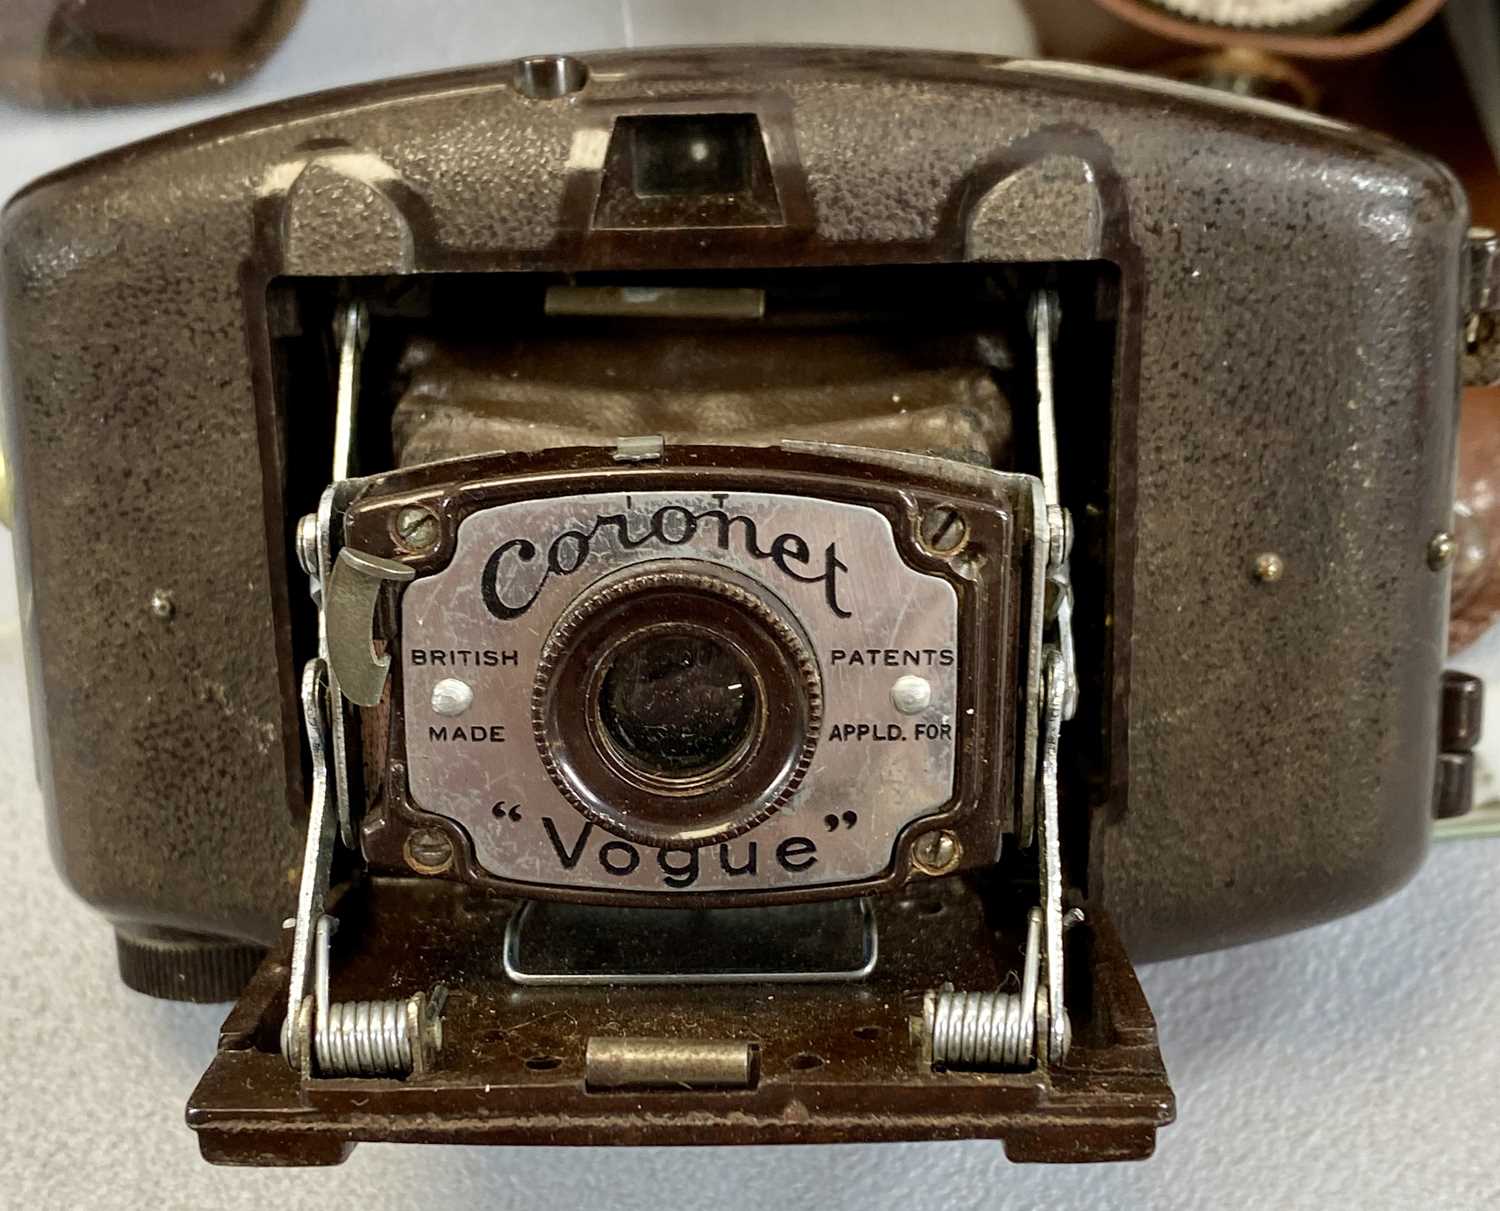 COLLECTION OF CAMERAS AND ACCESSORIES including a Coronet "Vogue" bakelite cased bellows camera, a - Image 4 of 5